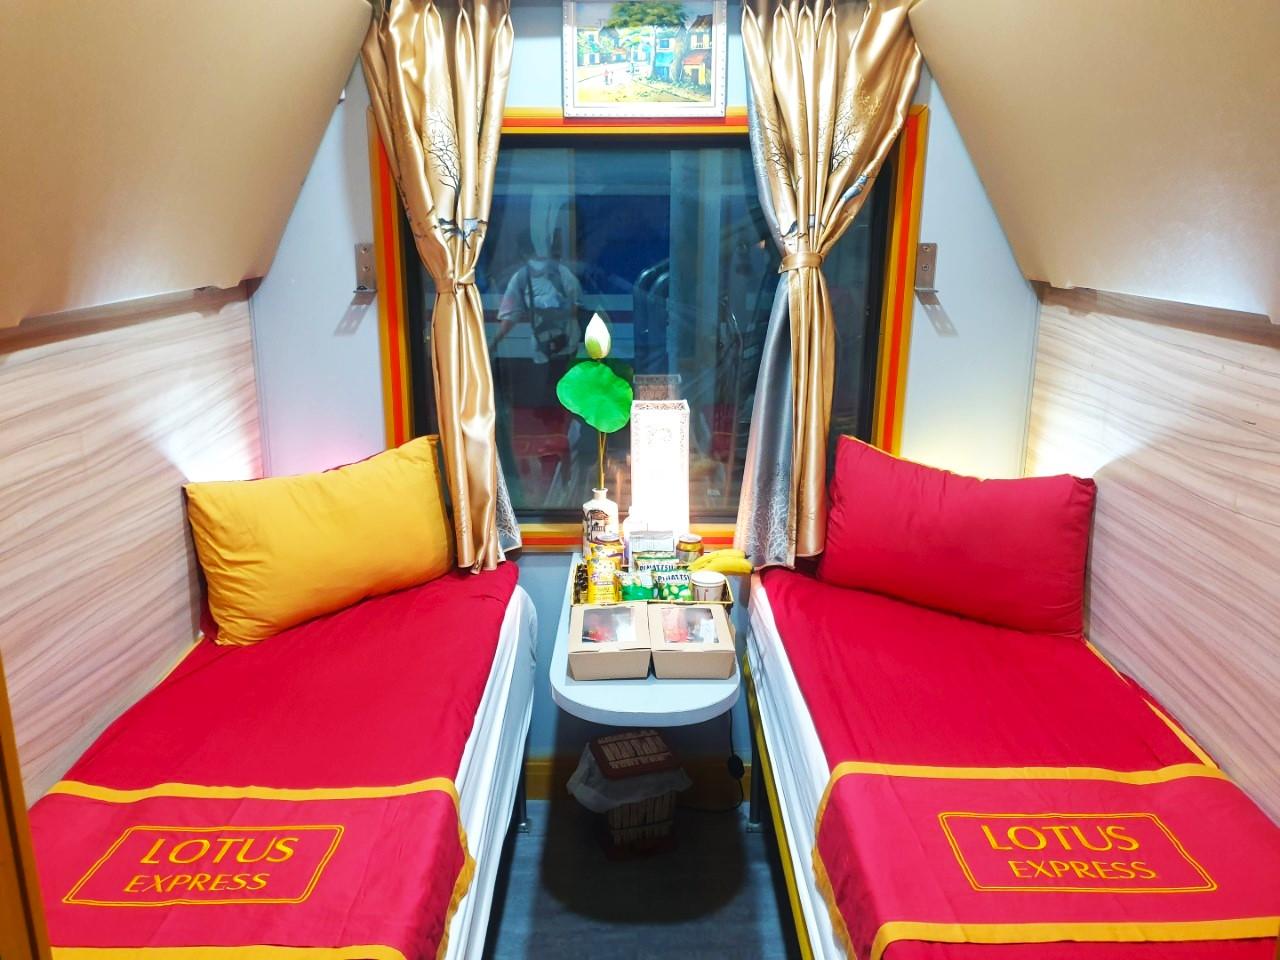 Hanoi - Dong Hoi in VIP 2 berth-cabin on SE19 (19h50 – 06h25) - Price per person not per cabin (VIP 2 Sleepers, One Way)